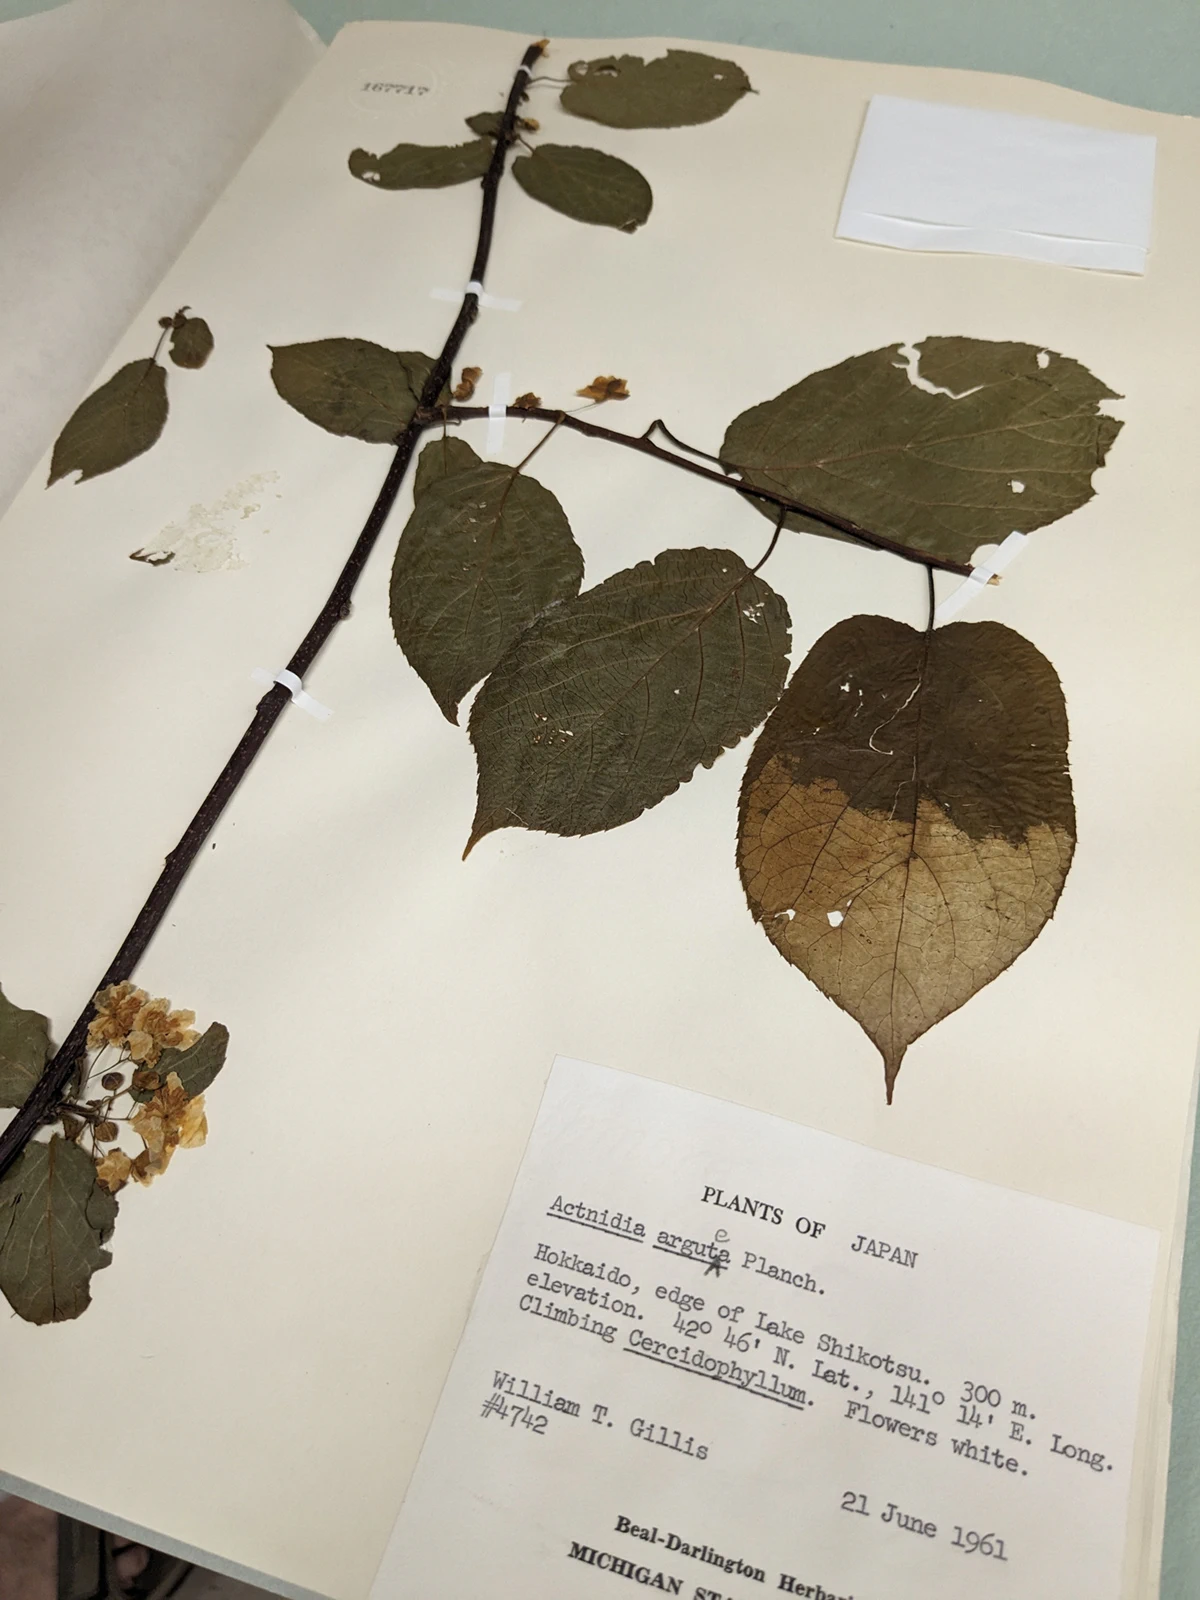 Green leaves and brown stems preserved in the herbarium’s collection. The text on the specimen page indicates the samples belong to an Actinidia arguta from Japan collected by William T. Gillis on June 21, 1961. 